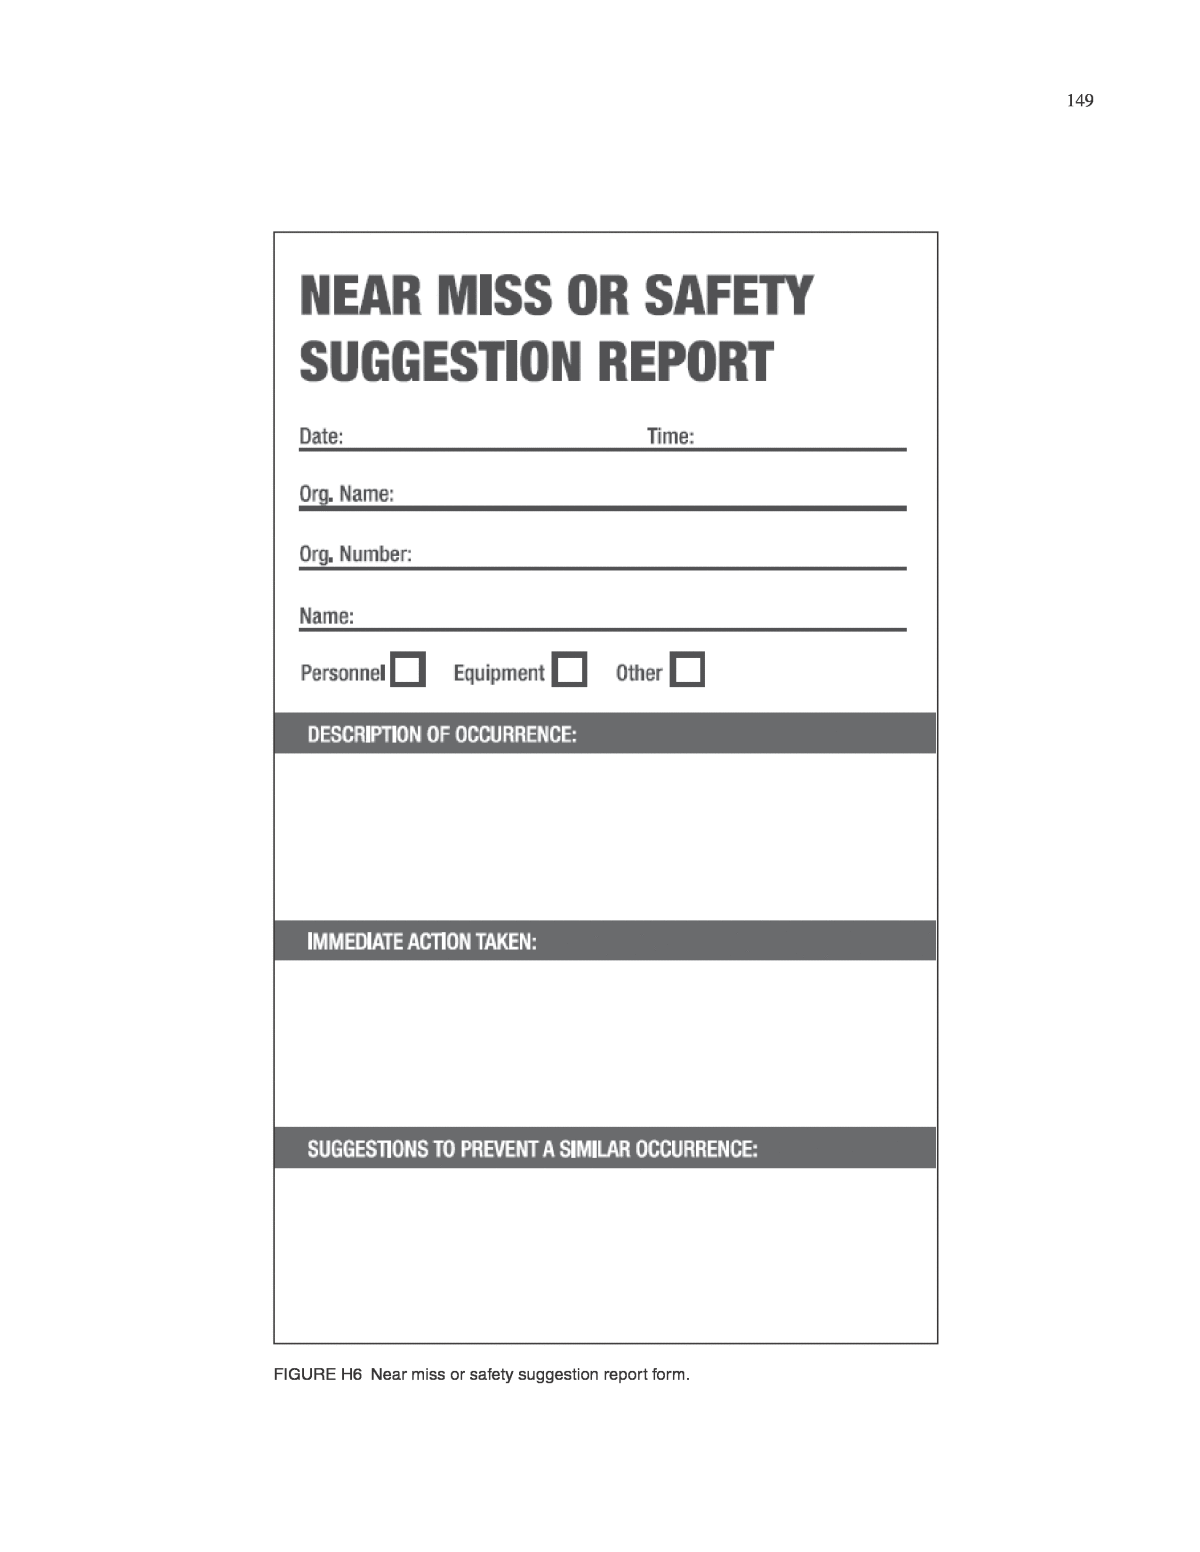 near miss reporting form example